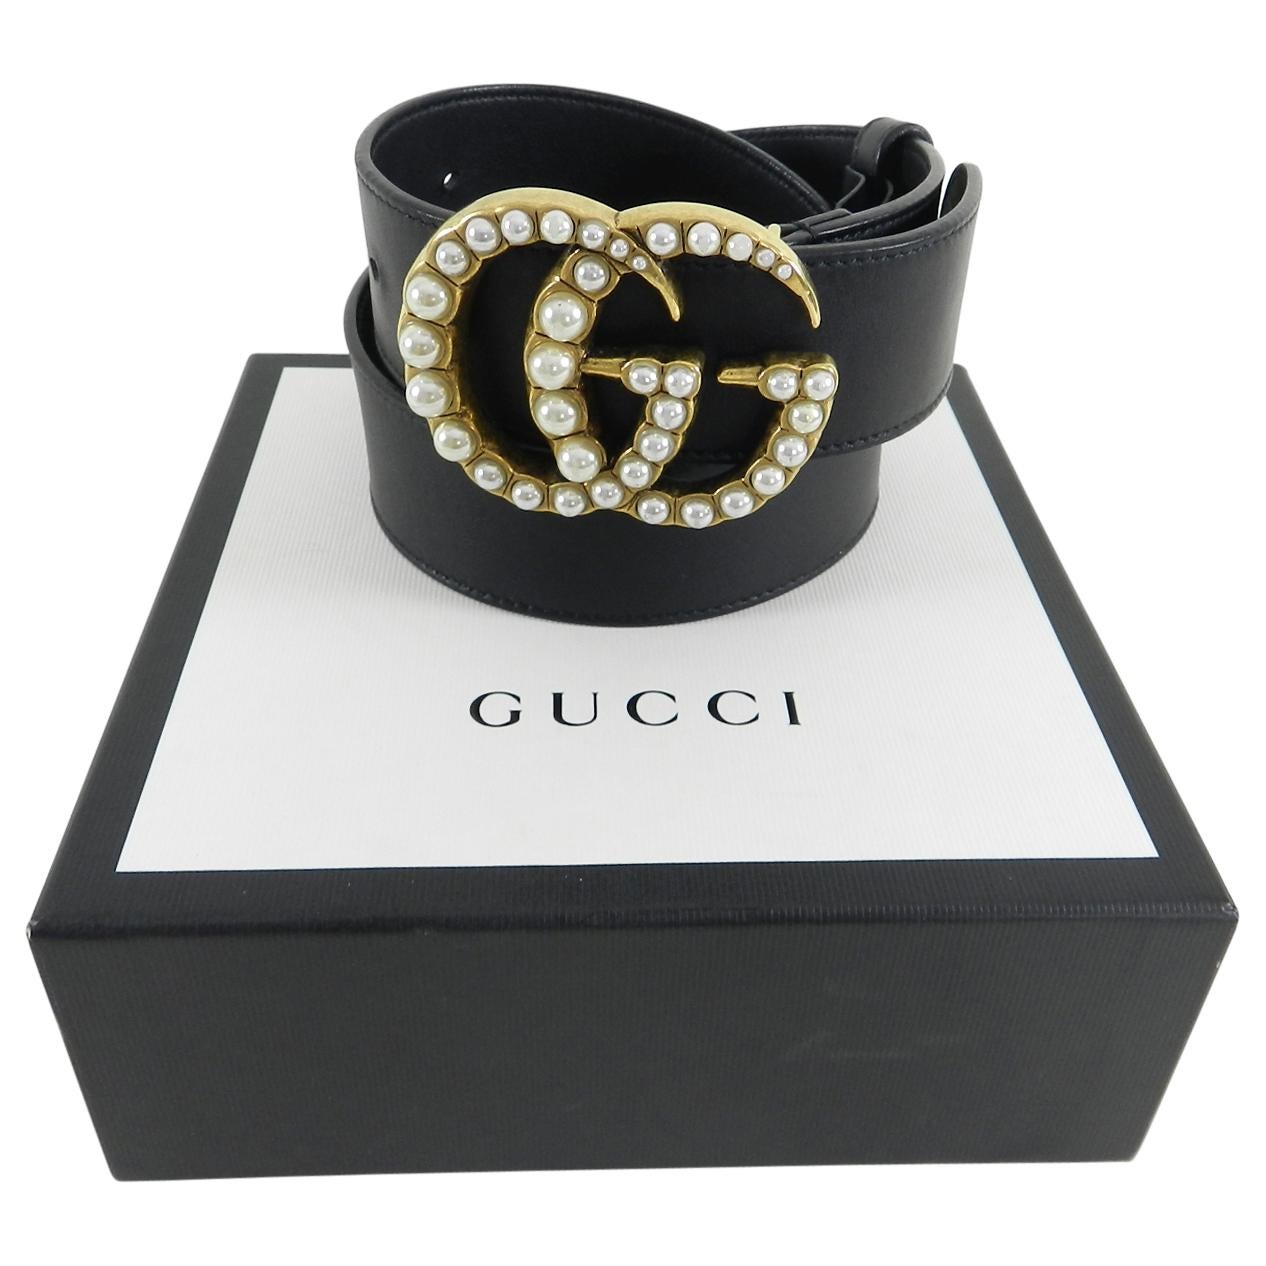 Gucci Marmont Pearl GG Buckle Belt.  Currently sold out everywhere. Antiqued brass metal GG logo buckle with faux pearls.  Black smooth leather belt measures 1.5” wide and is marked size 38 / 95.  The belt has holes at 36 - 40” so will fit a size L